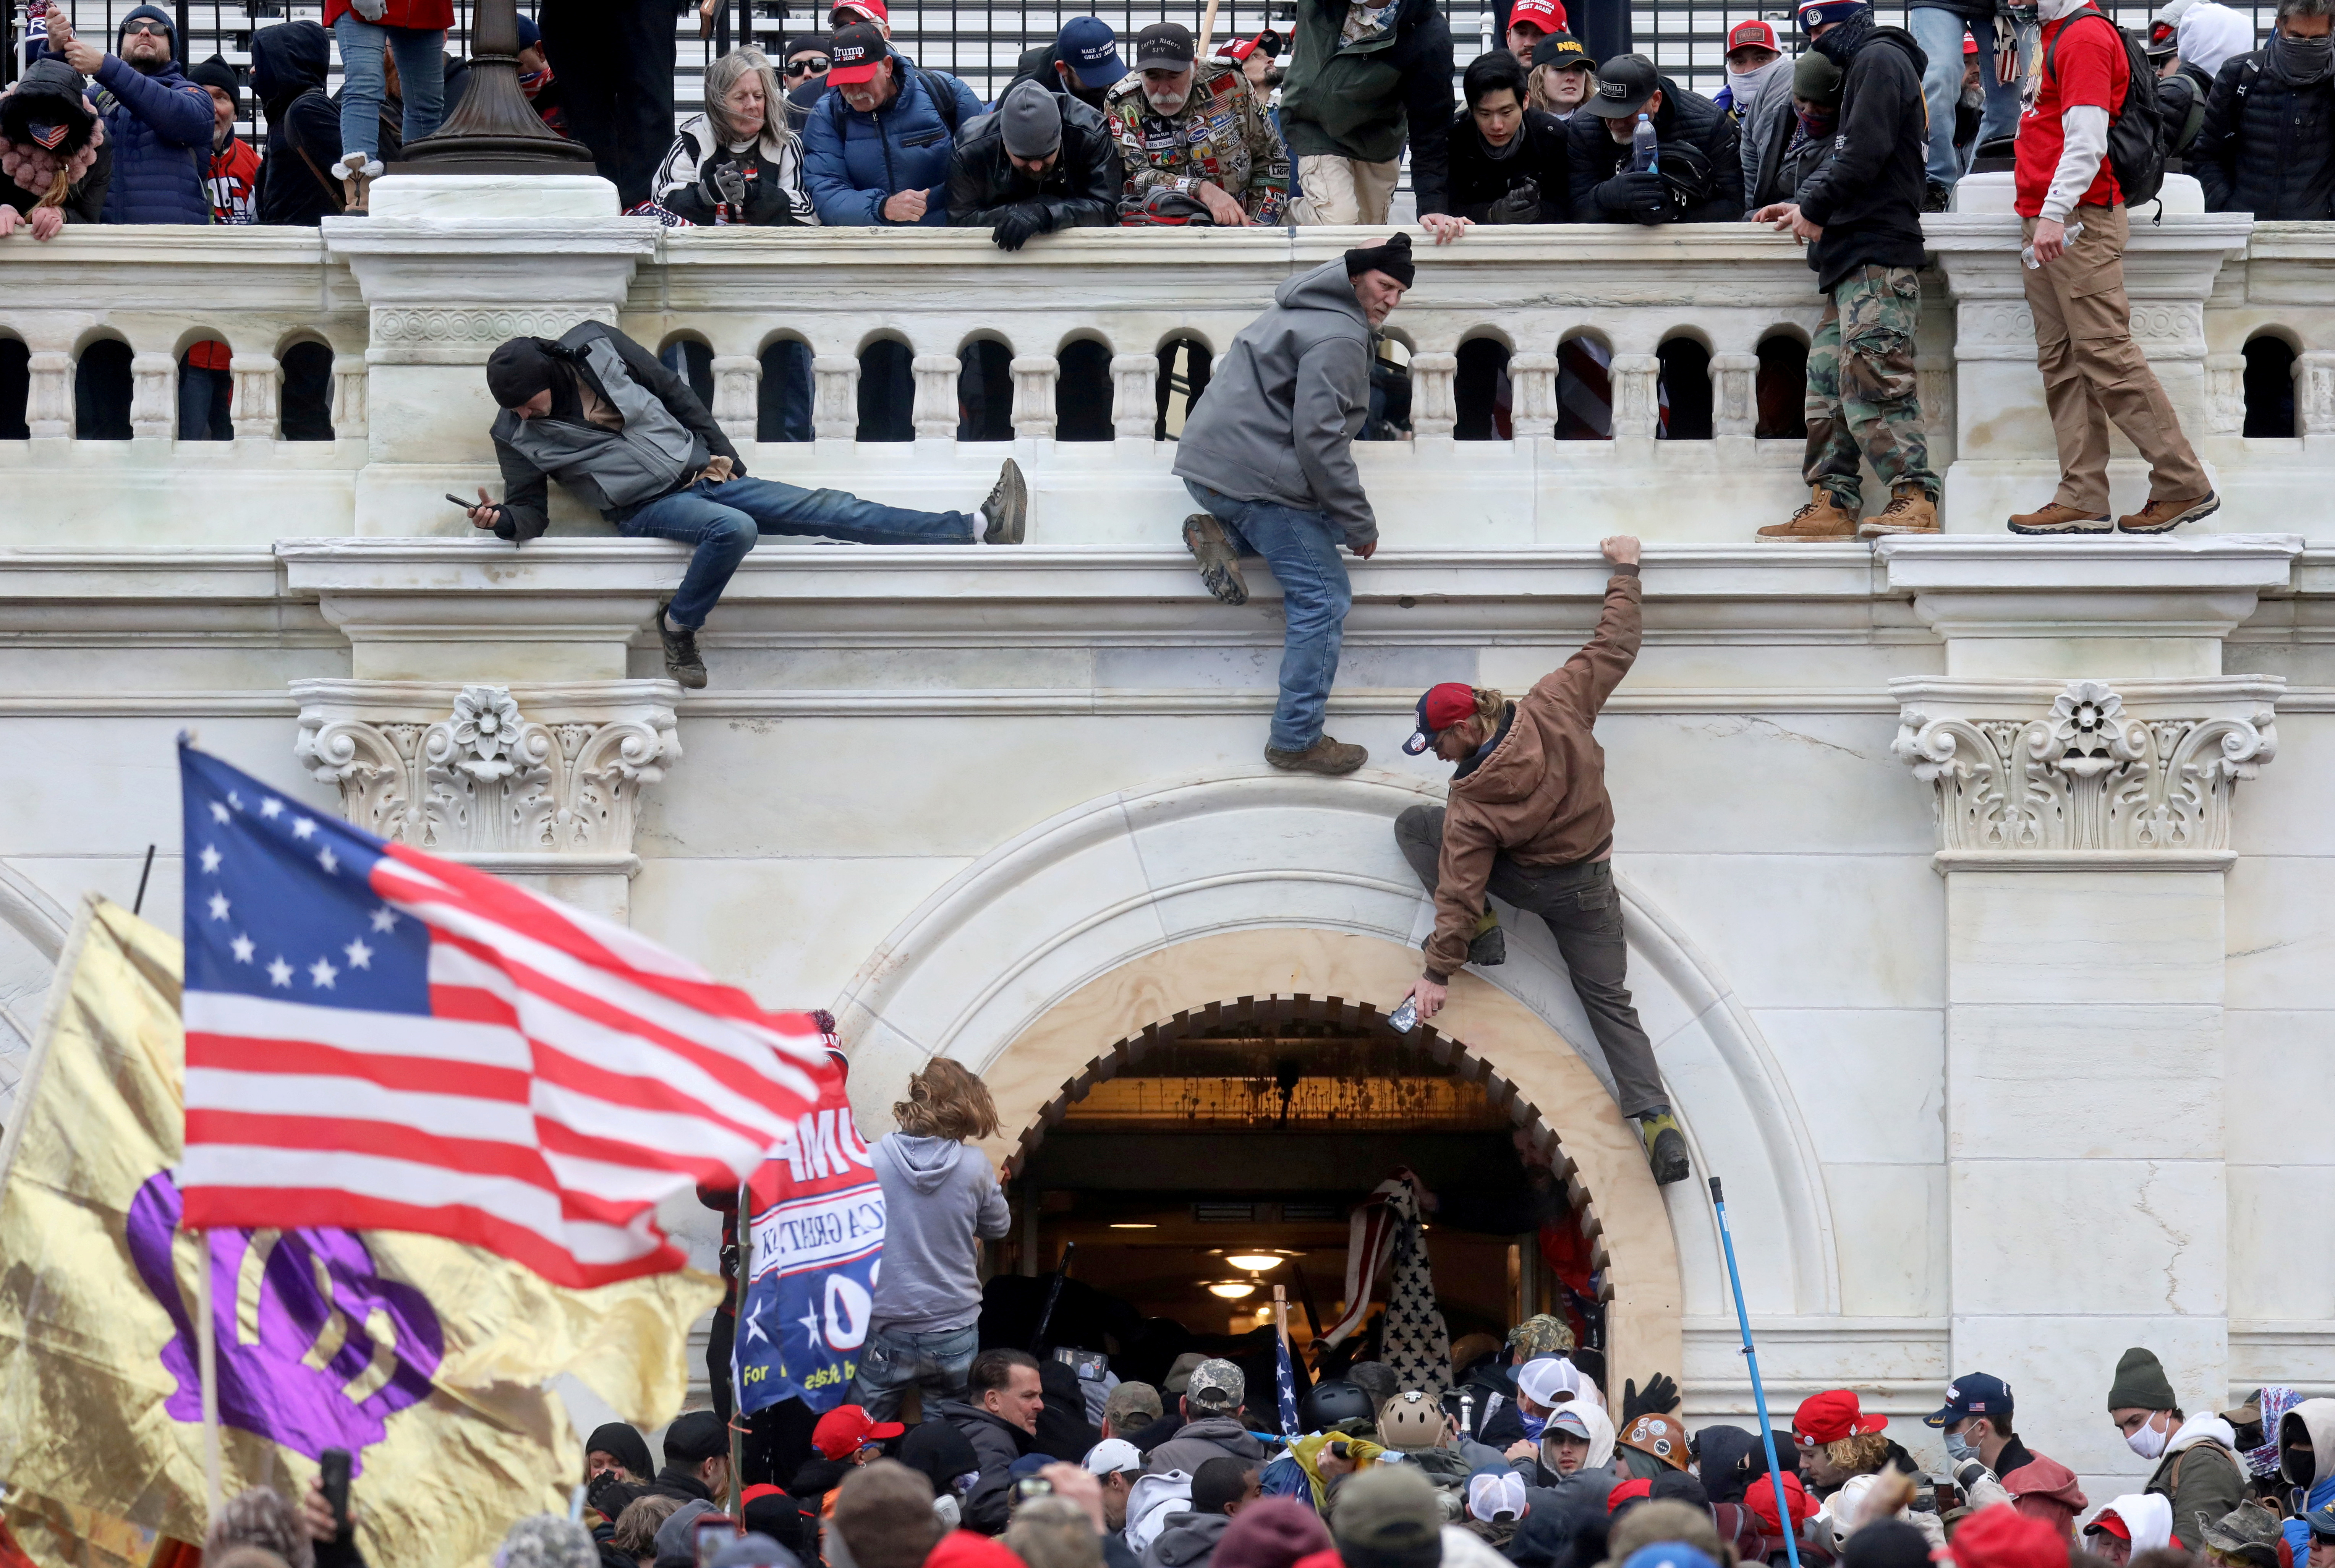 A pro-Trump crowd stormed the US Capitol Building on January 6, 2021